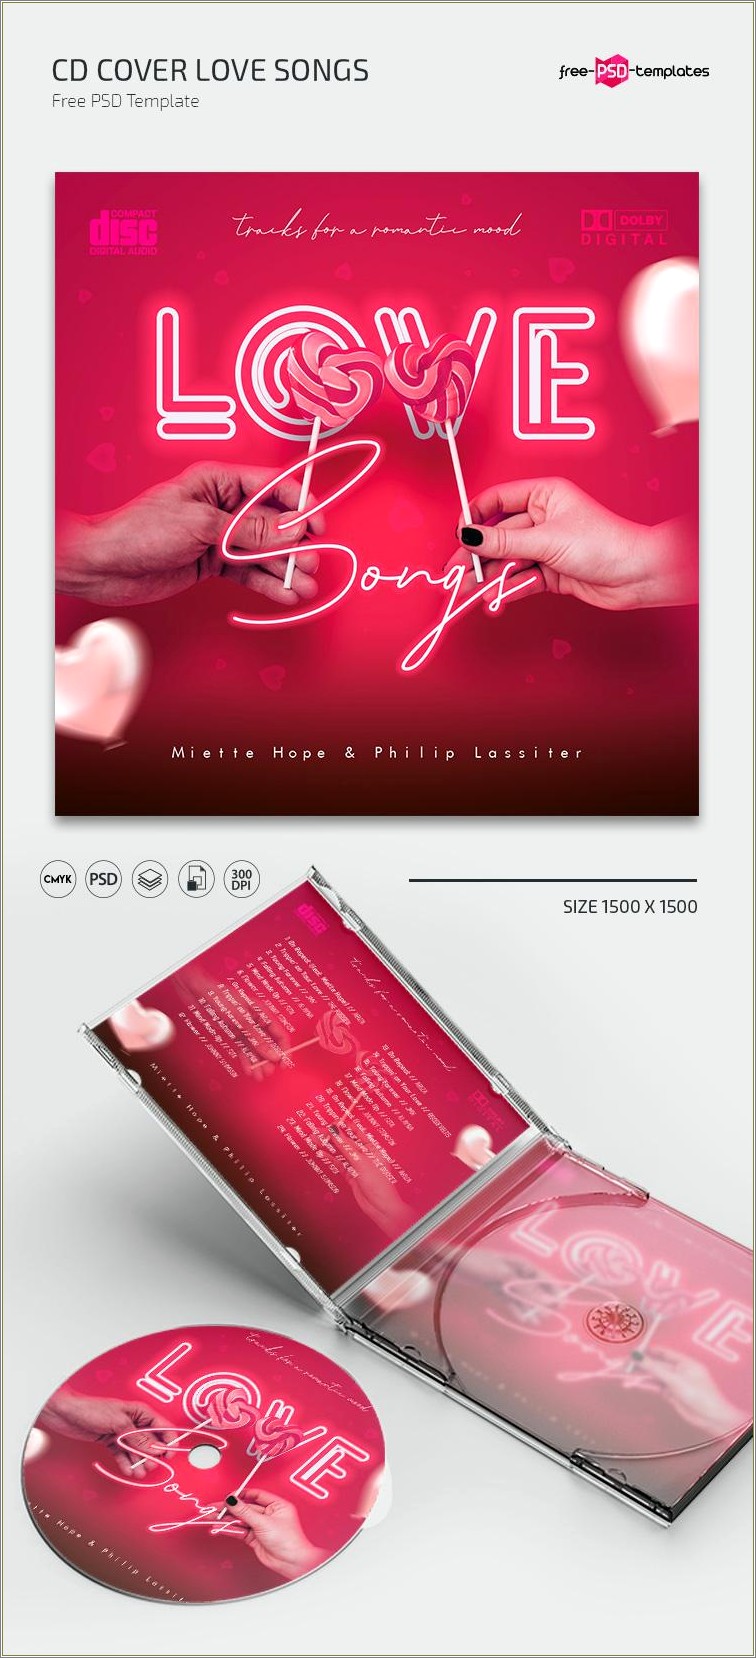 Cd Cover Template Photoshop Download Free